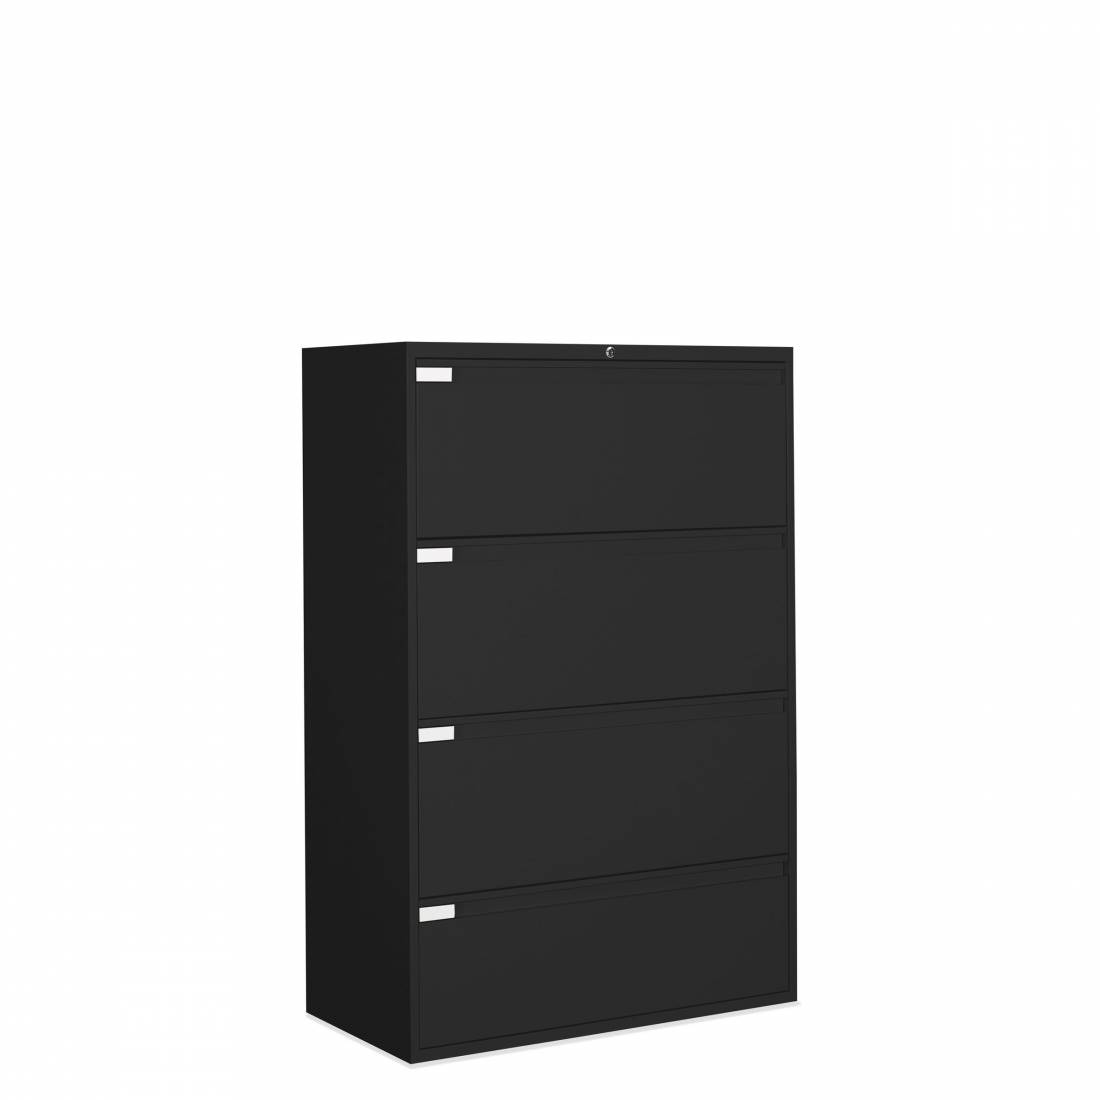 36”W 4 Drawer Lateral File